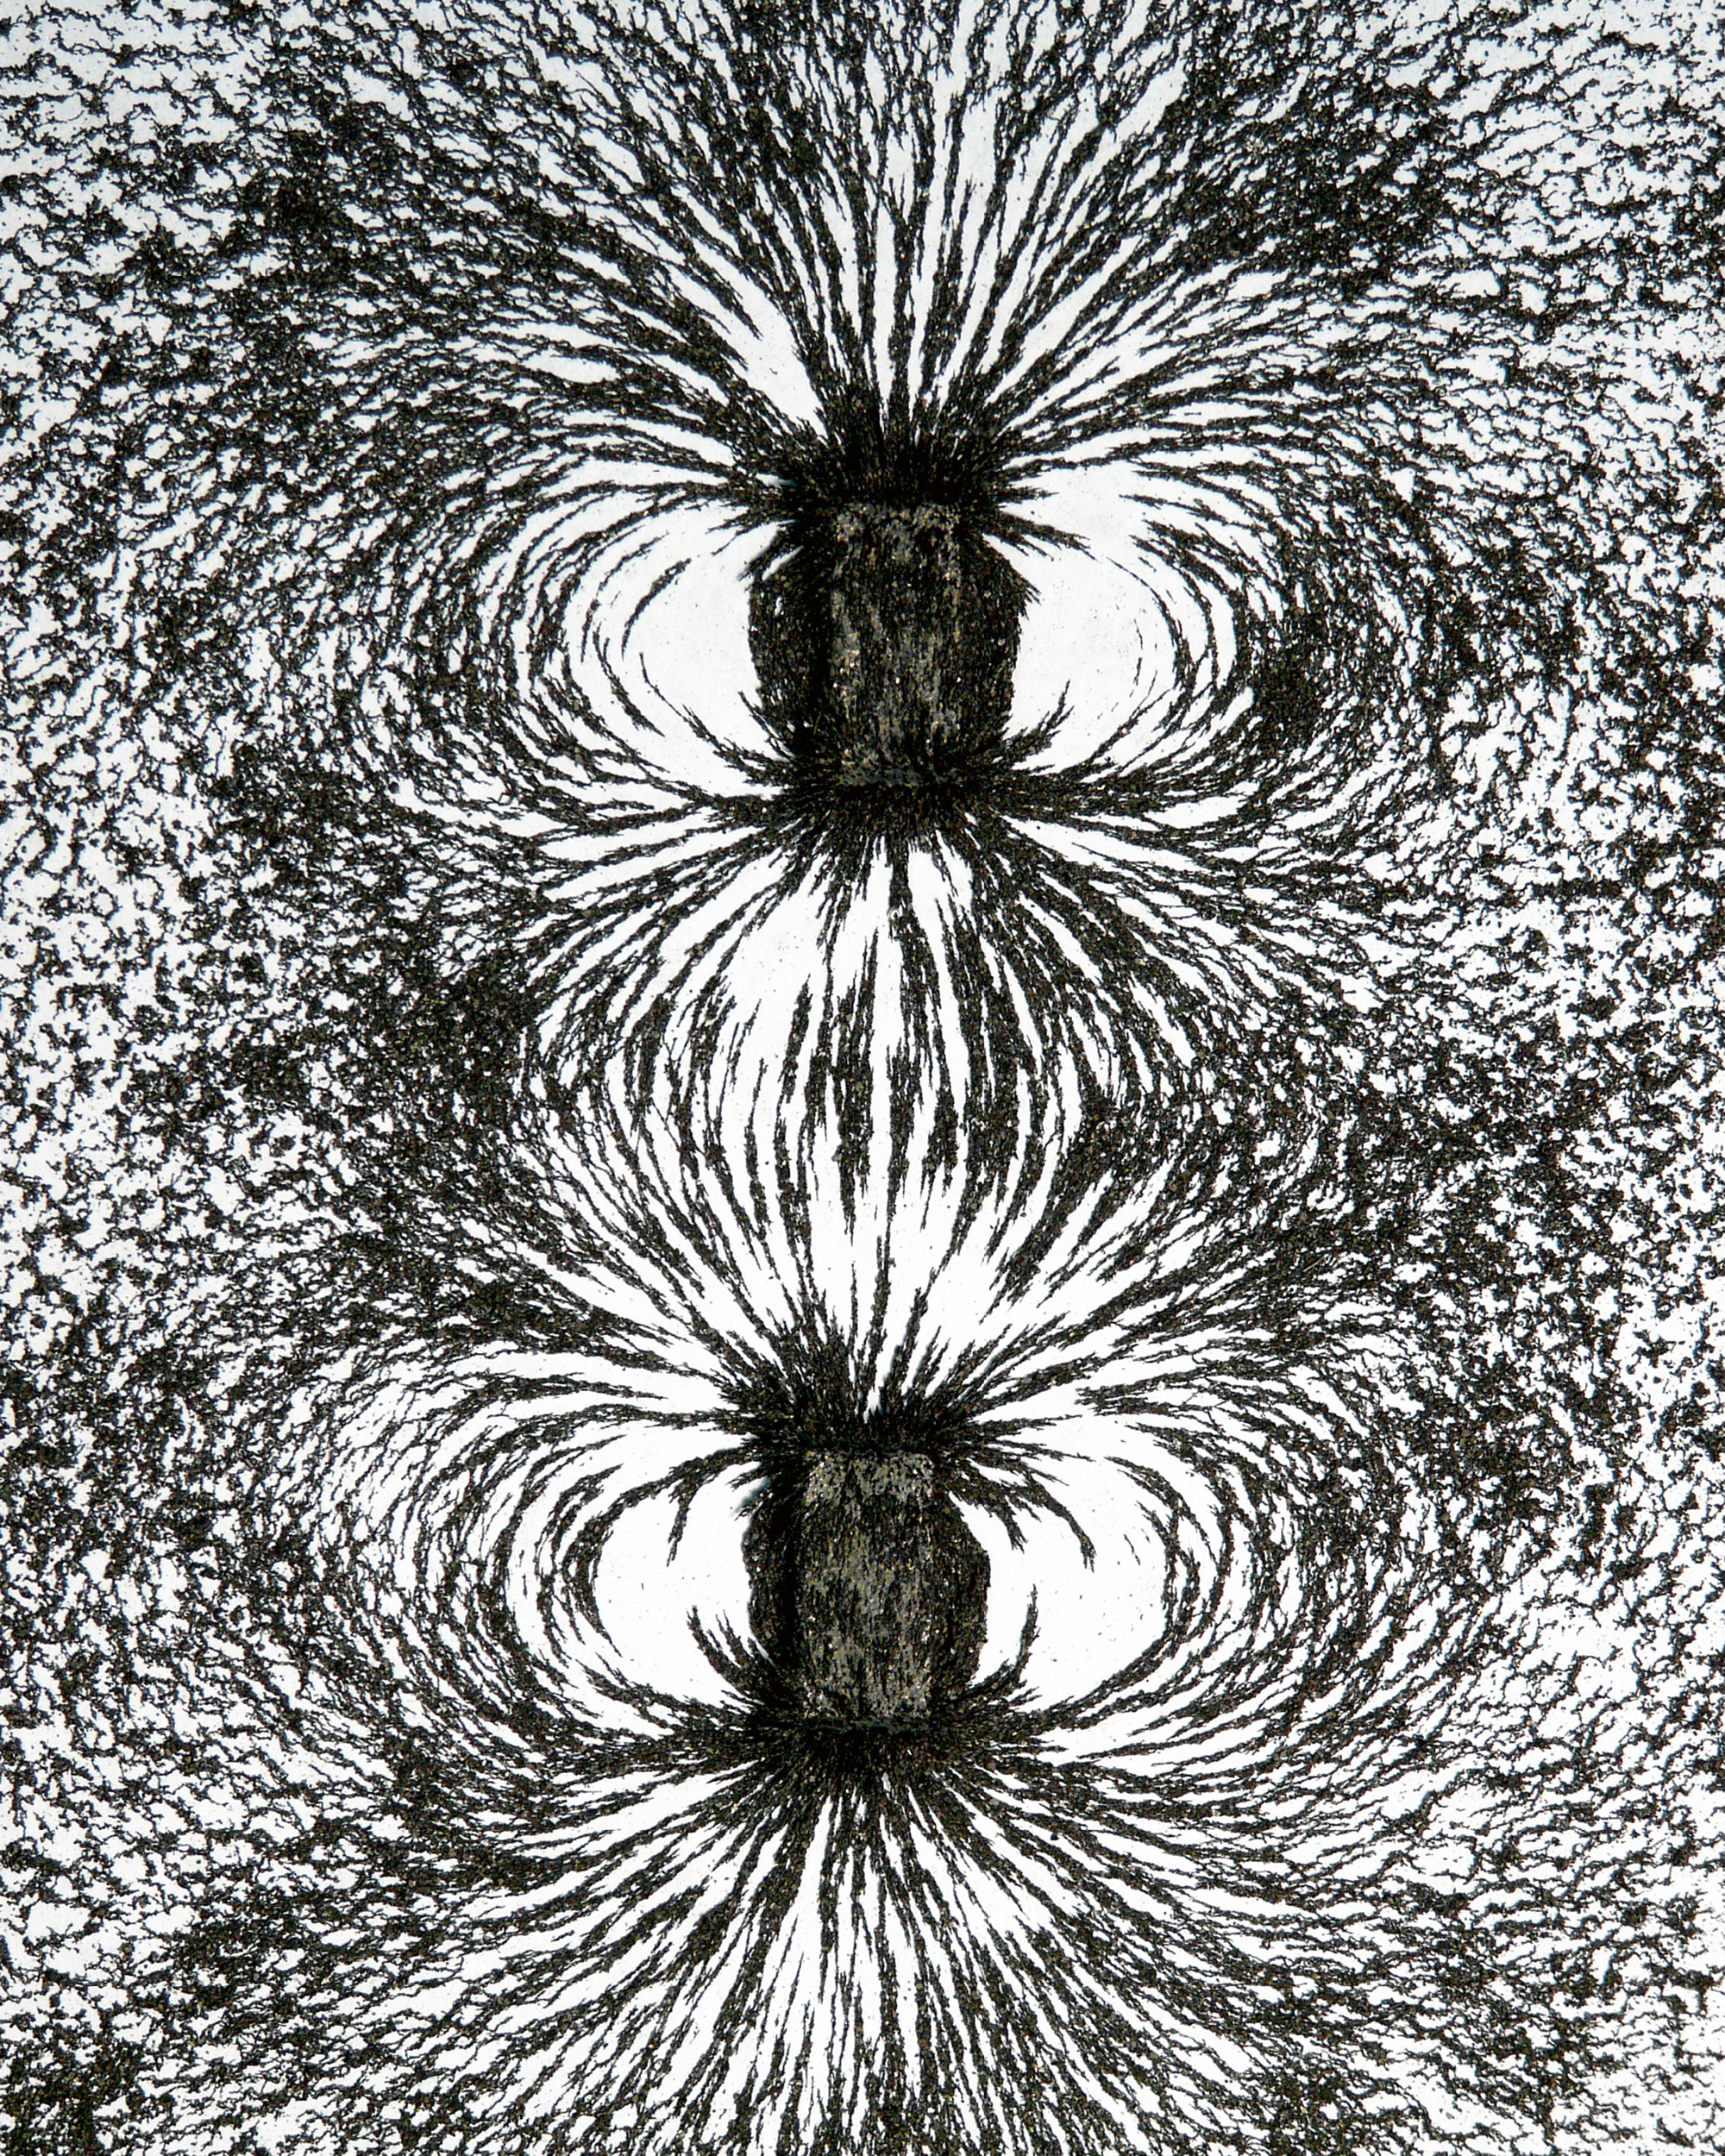 An image of iron filings that reveal the patterns of attraction between magnetic objects.